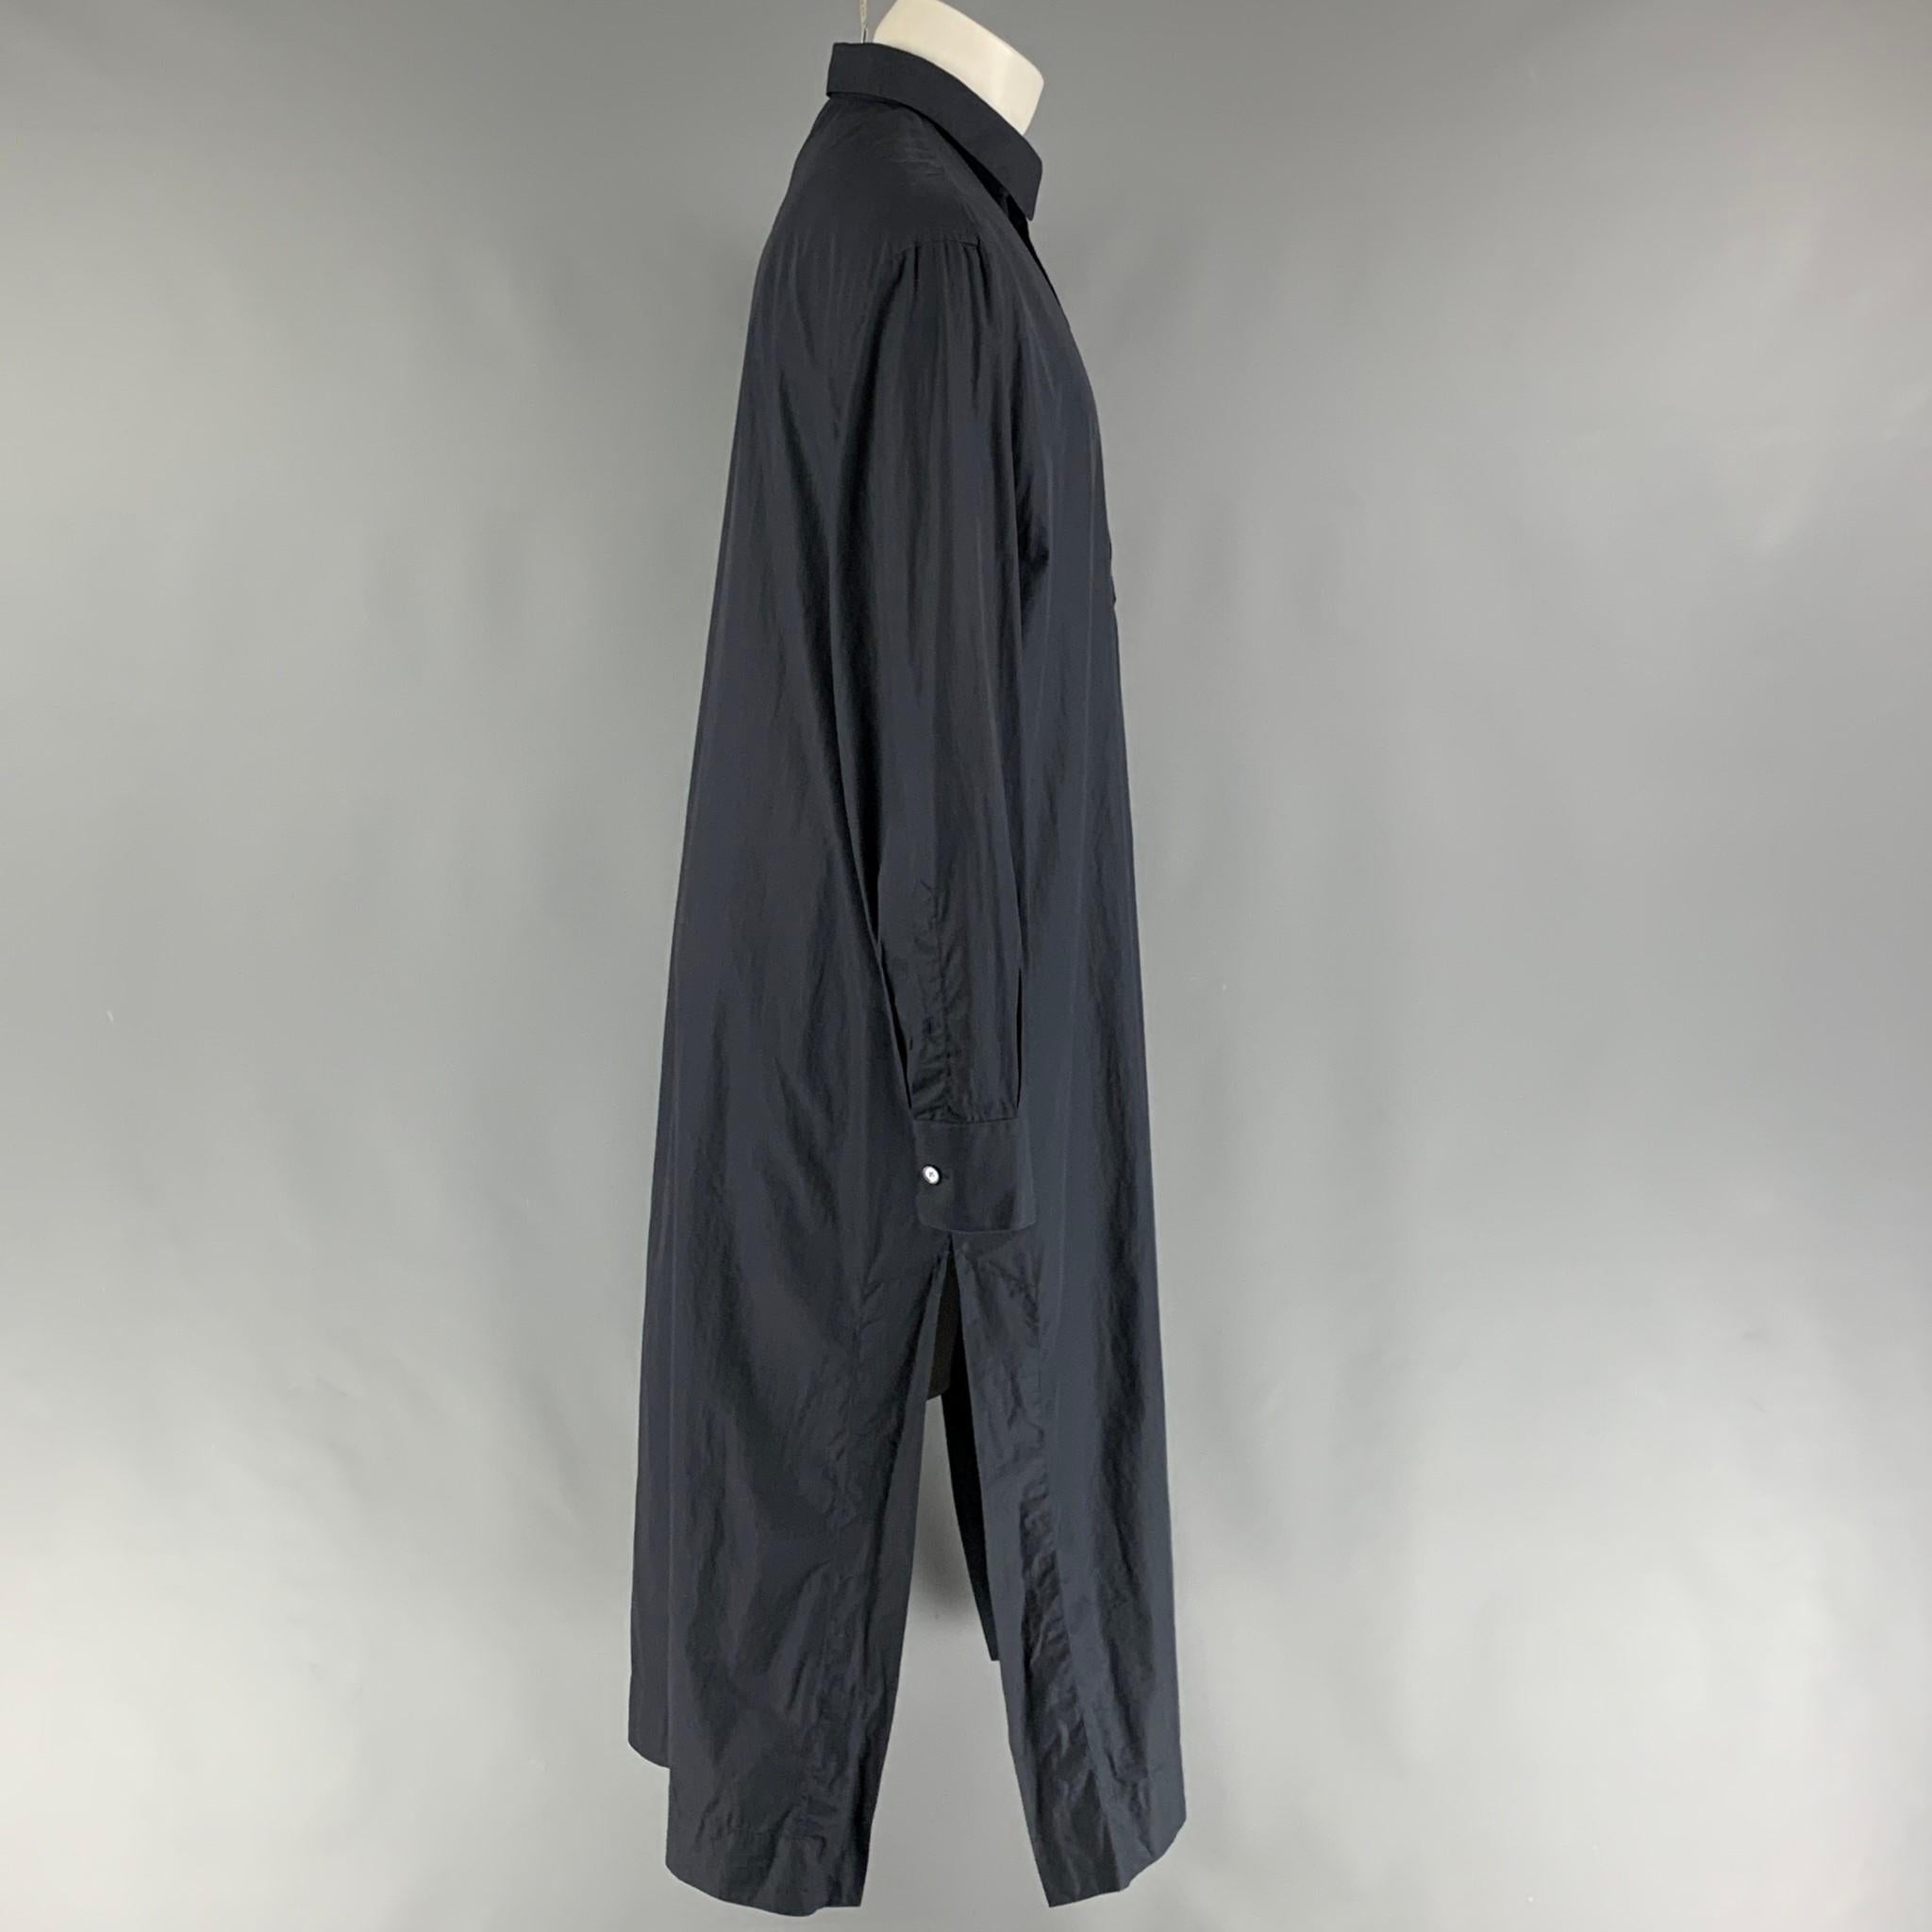 DOLCE & GABBANA long sleeve shirt comes in a navy cotton featuring a caftan style, loose fit, slide sits, spread collar, and a half buttoned closure. Made in Italy. 

Very Good Pre-Owned Condition.
Marked: 48

Measurements:

Shoulder: 20 in.
Chest: